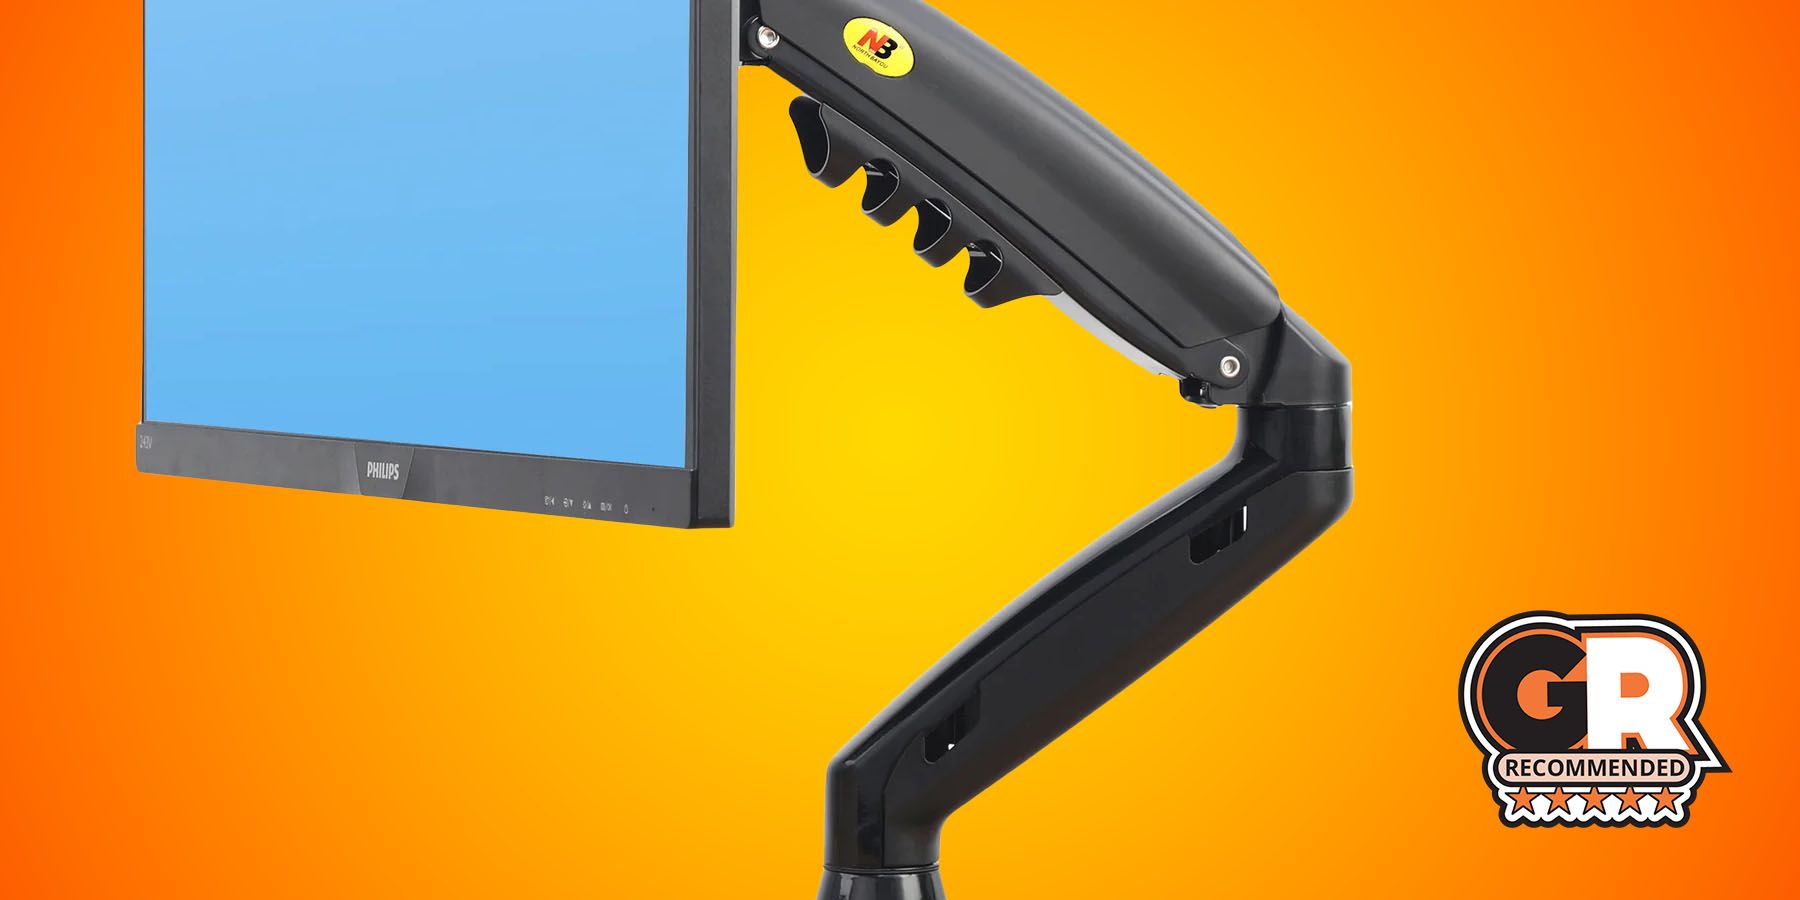 Monitor Arm vs Stand: Which is Best for Your Setup?